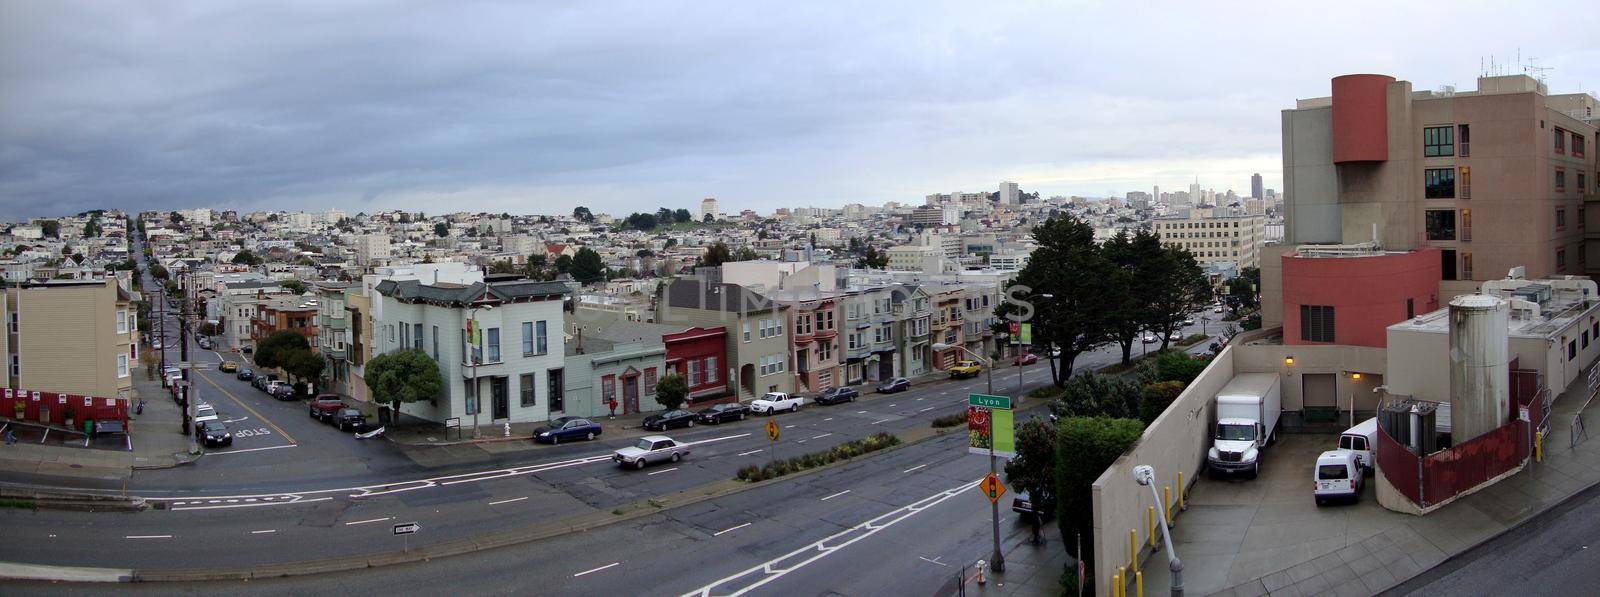 San Francisco Geary Street Cityscape Panorama by EricGBVD